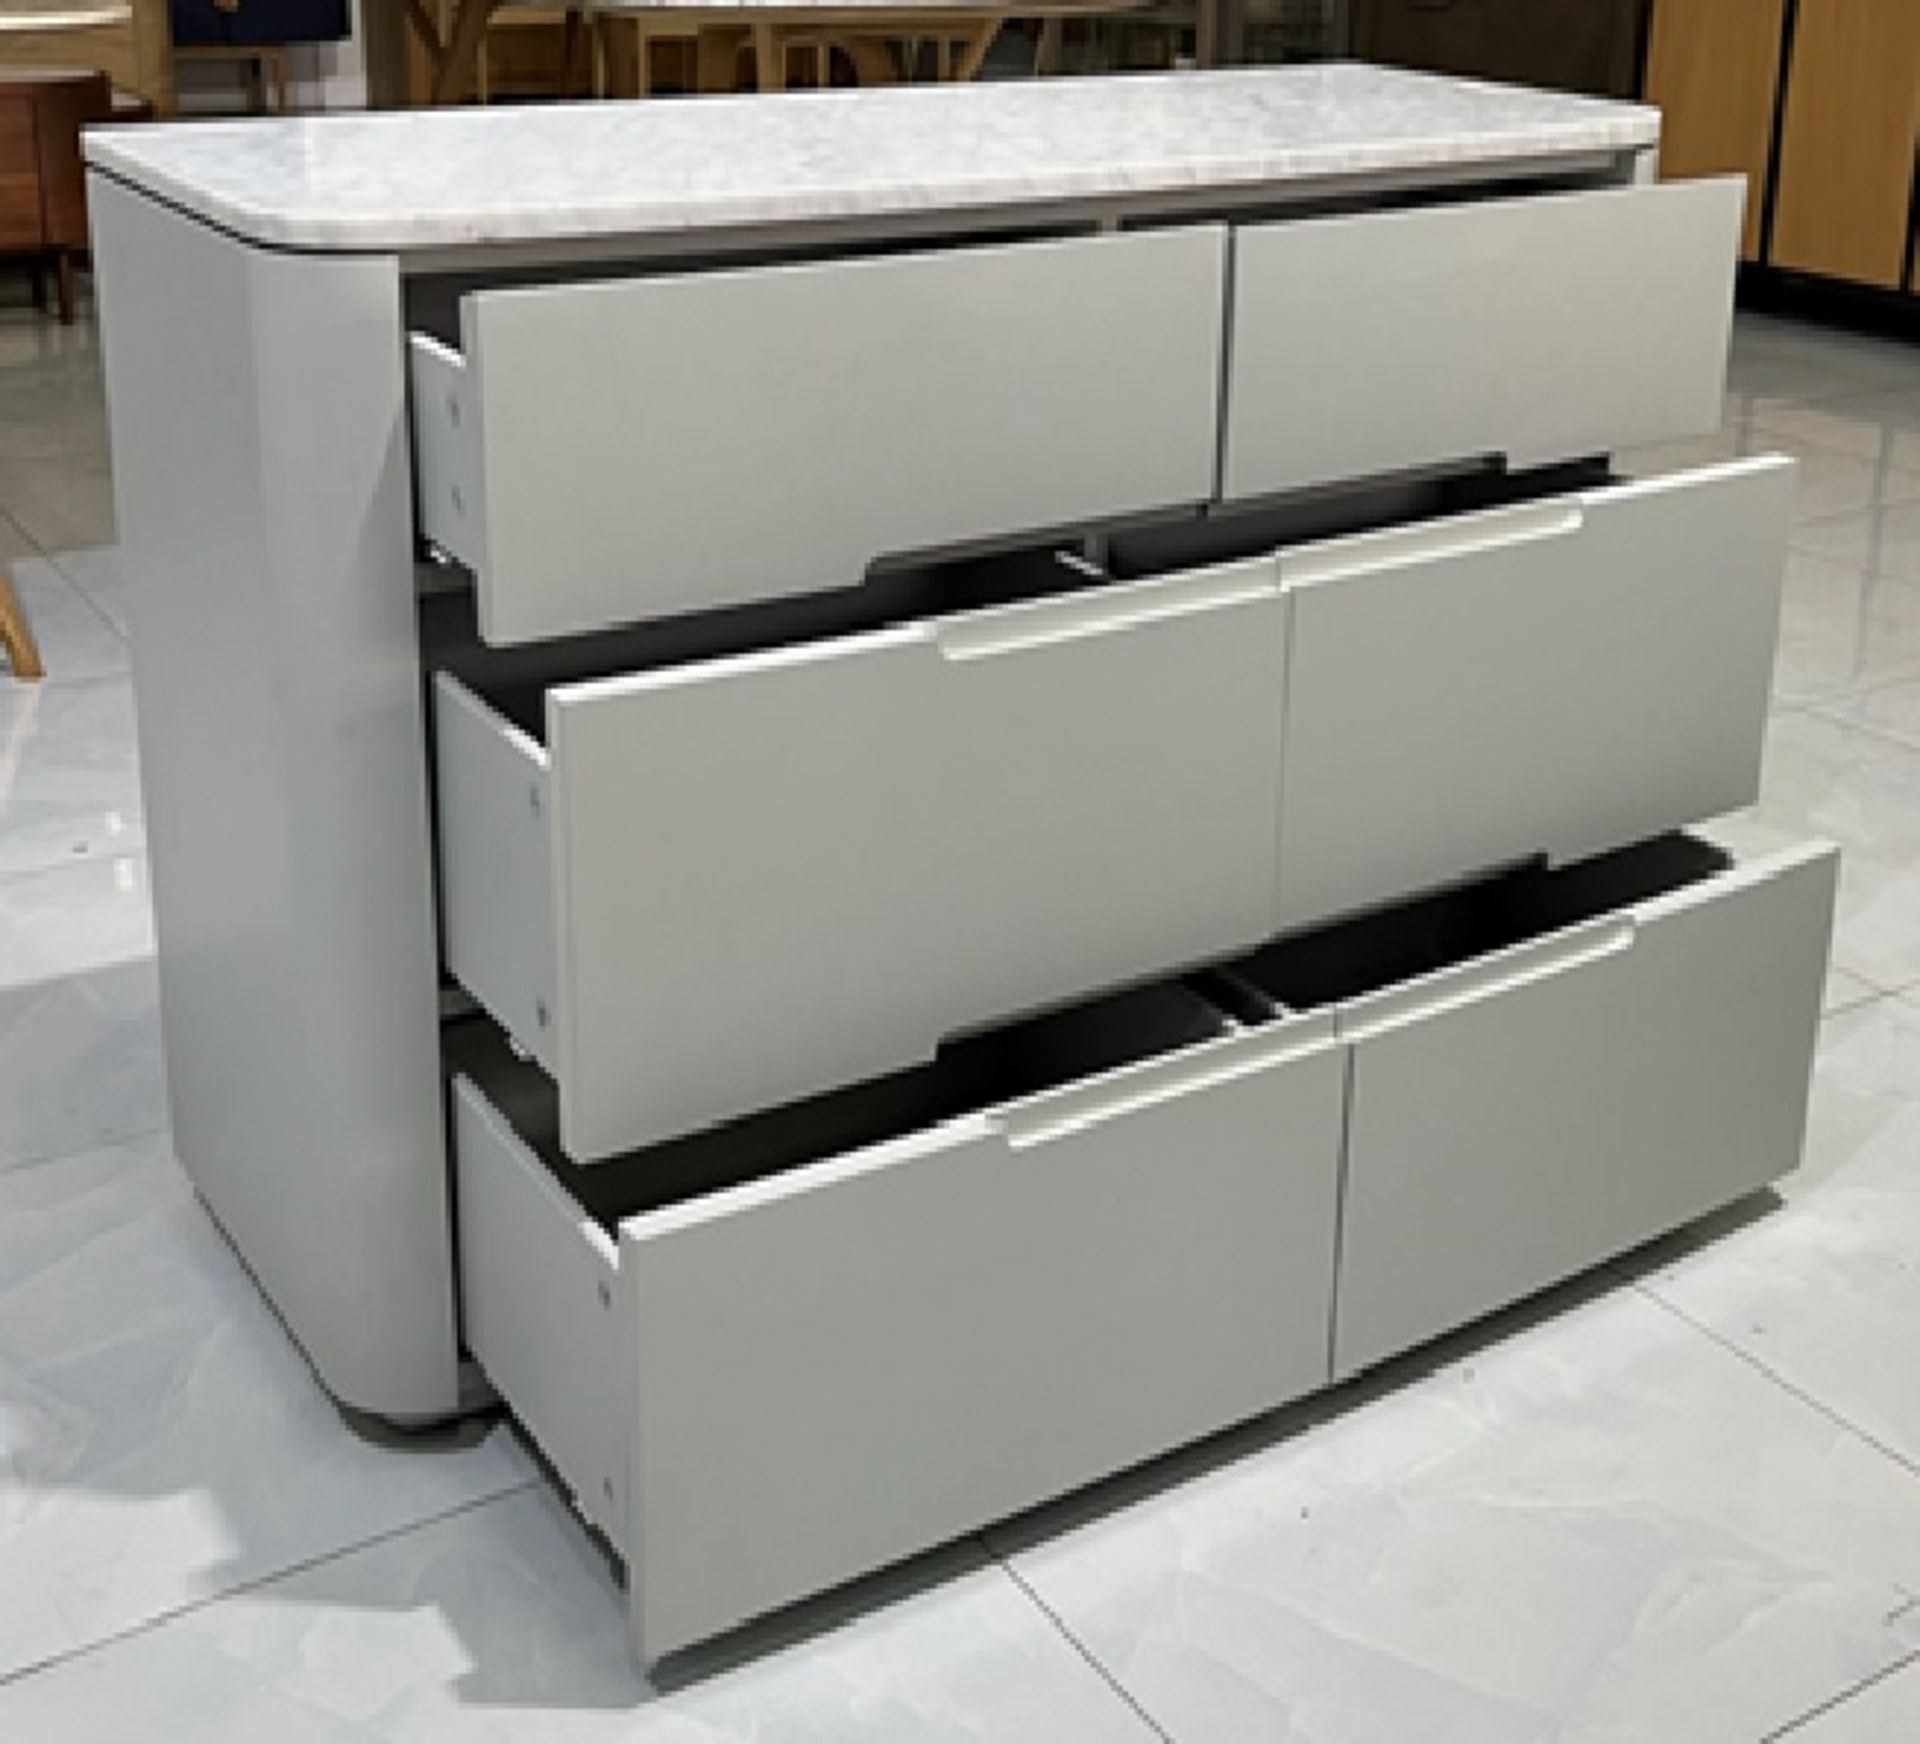 Florence 6 Drawer Bedroom Chest With Italian Carrara Marble Top Sample Product 120 x 45 x 75cm - Image 2 of 3